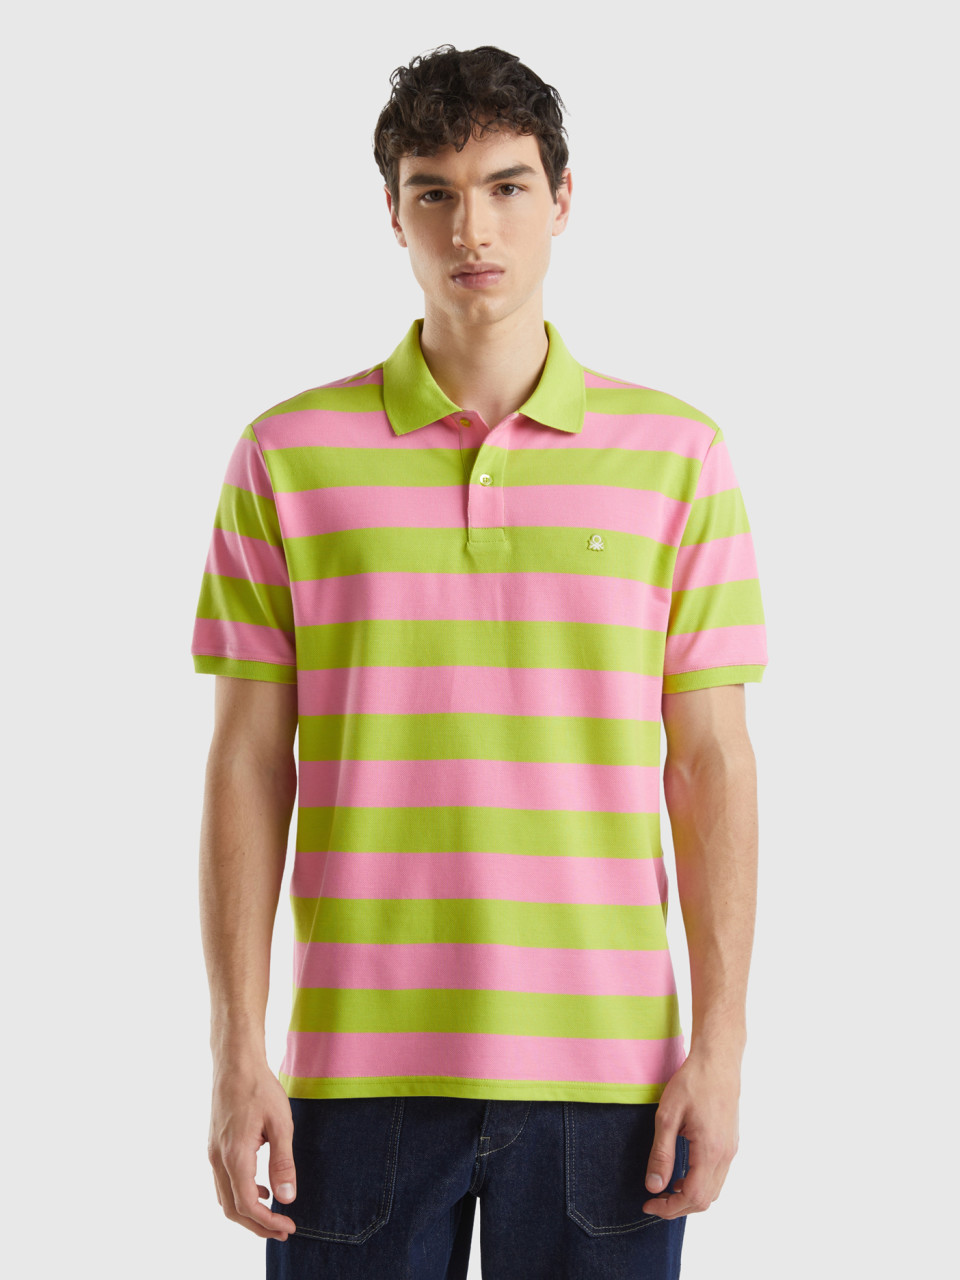 Benetton, Polo With Pink And Lime Yellow Stripes, Multi-color, Men